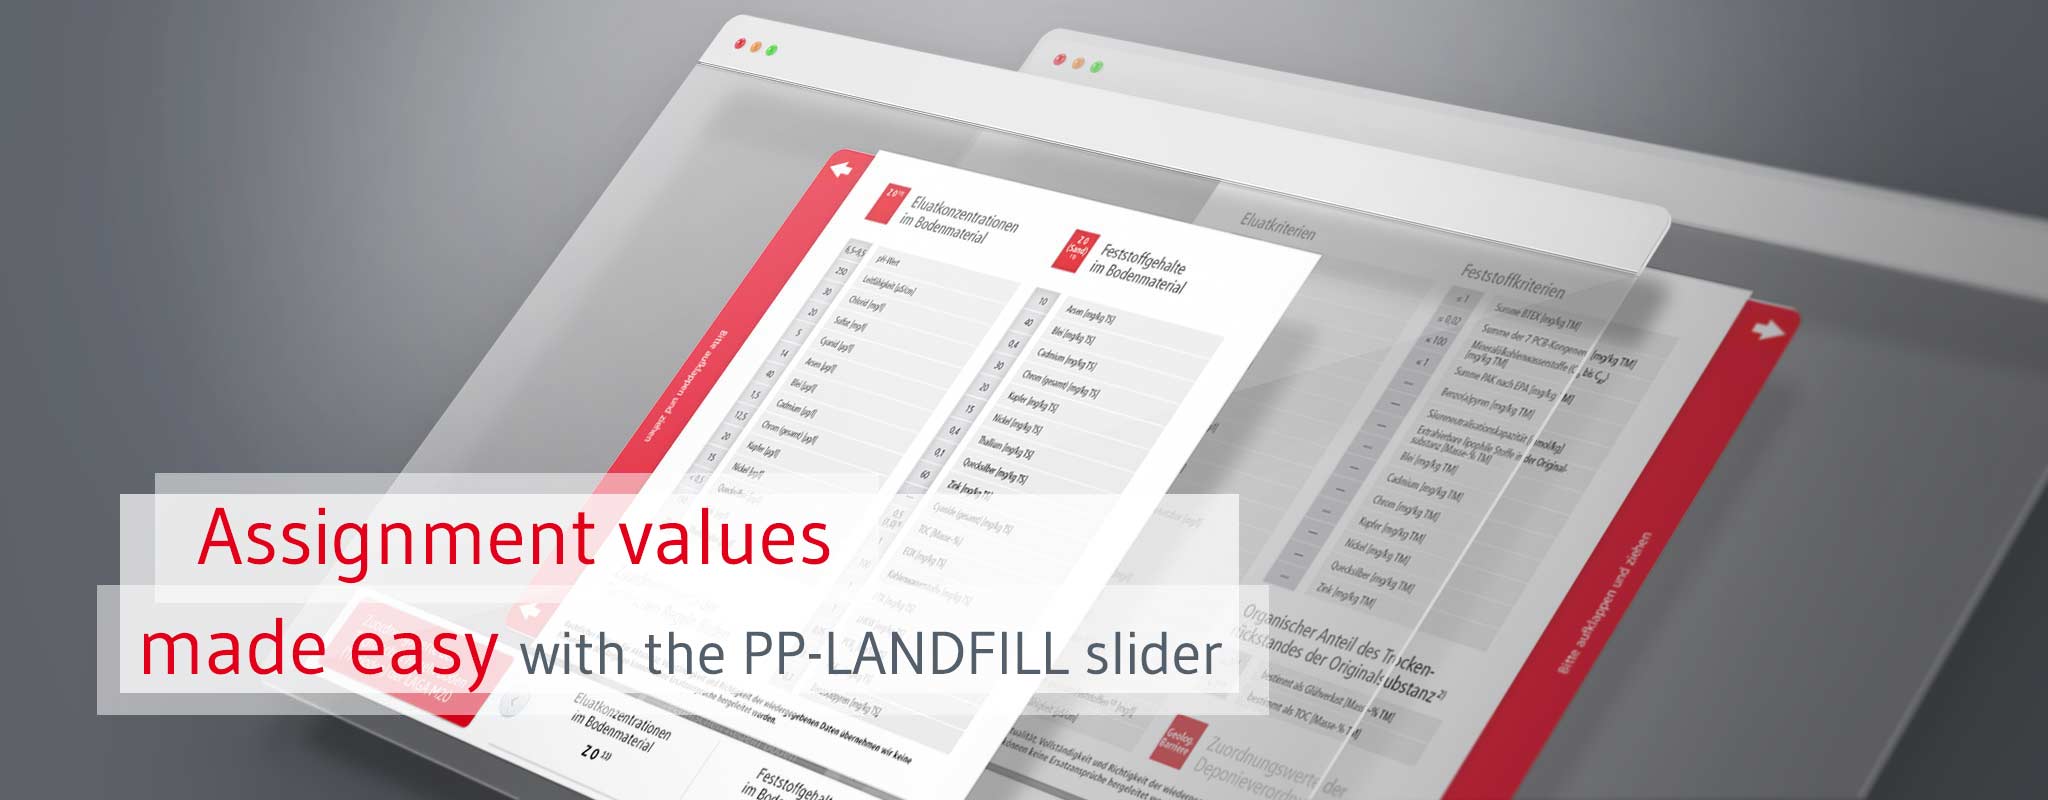 Assignment assignment values of the German Landfill Directive in the landfill slider